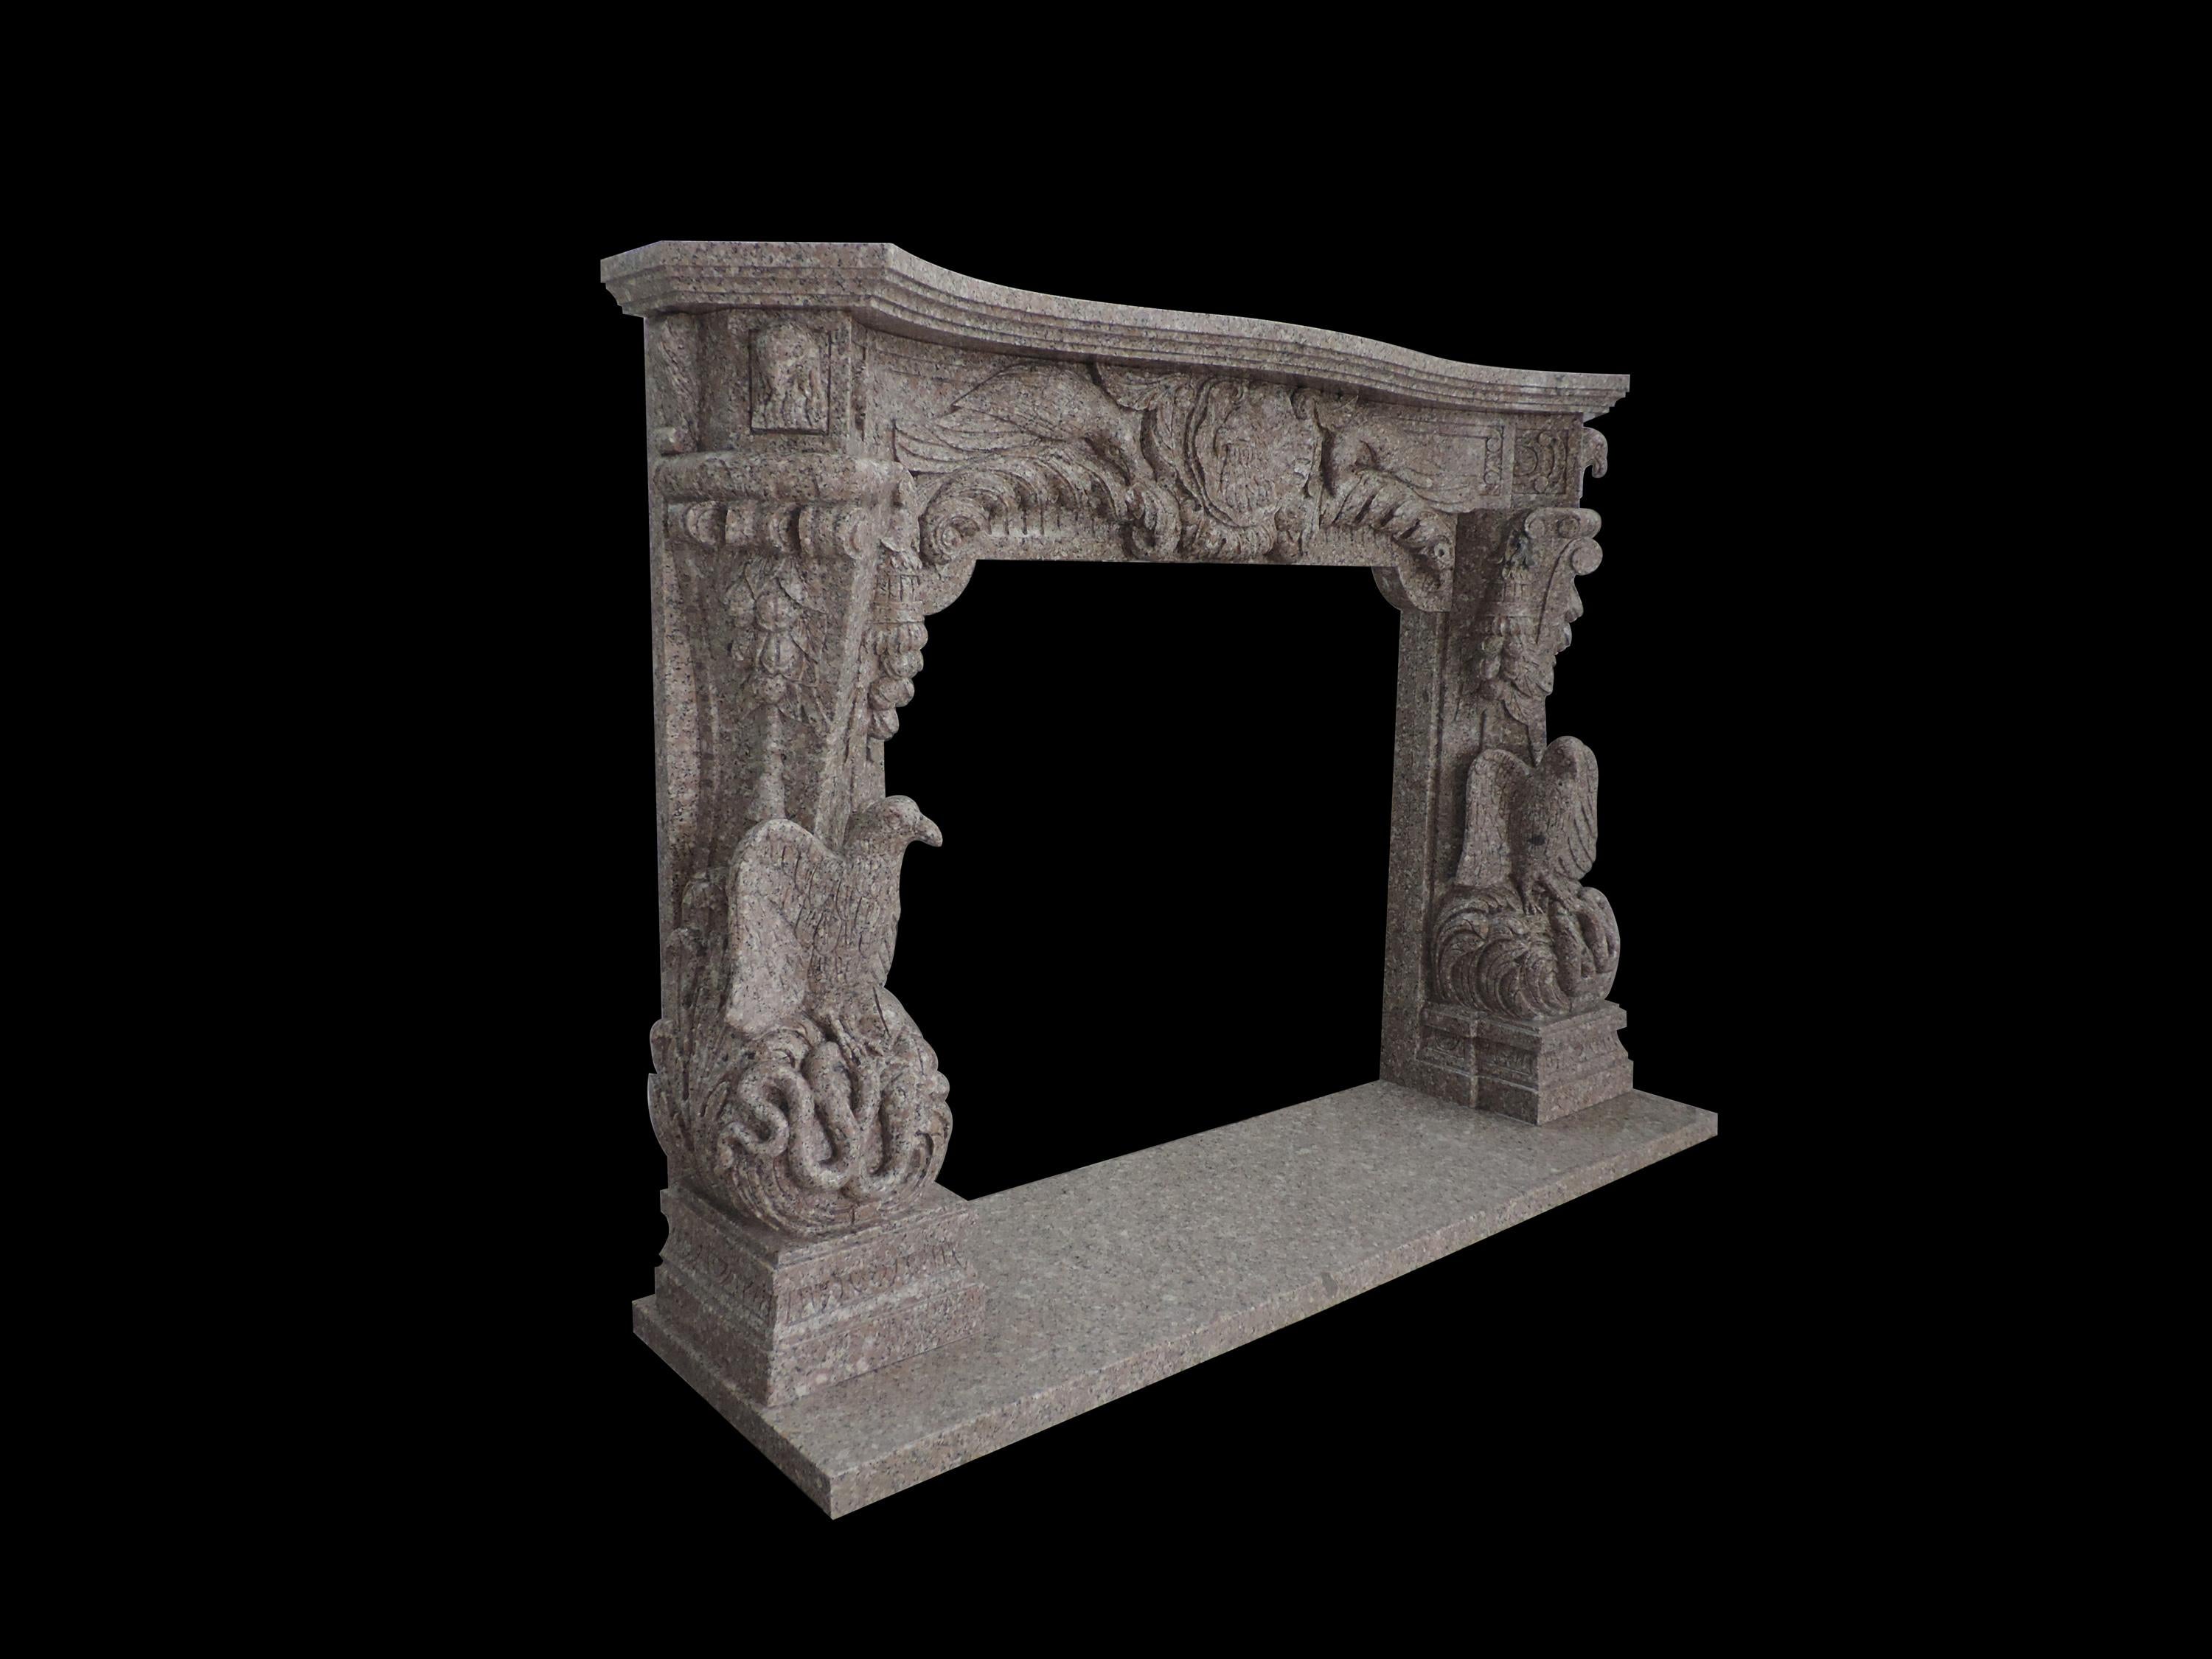 Beautiful hand carved granite eagle themed ornate fire surround with eagle profile frieze and open winged eagle corbels and eagle head end blocks with hearth.